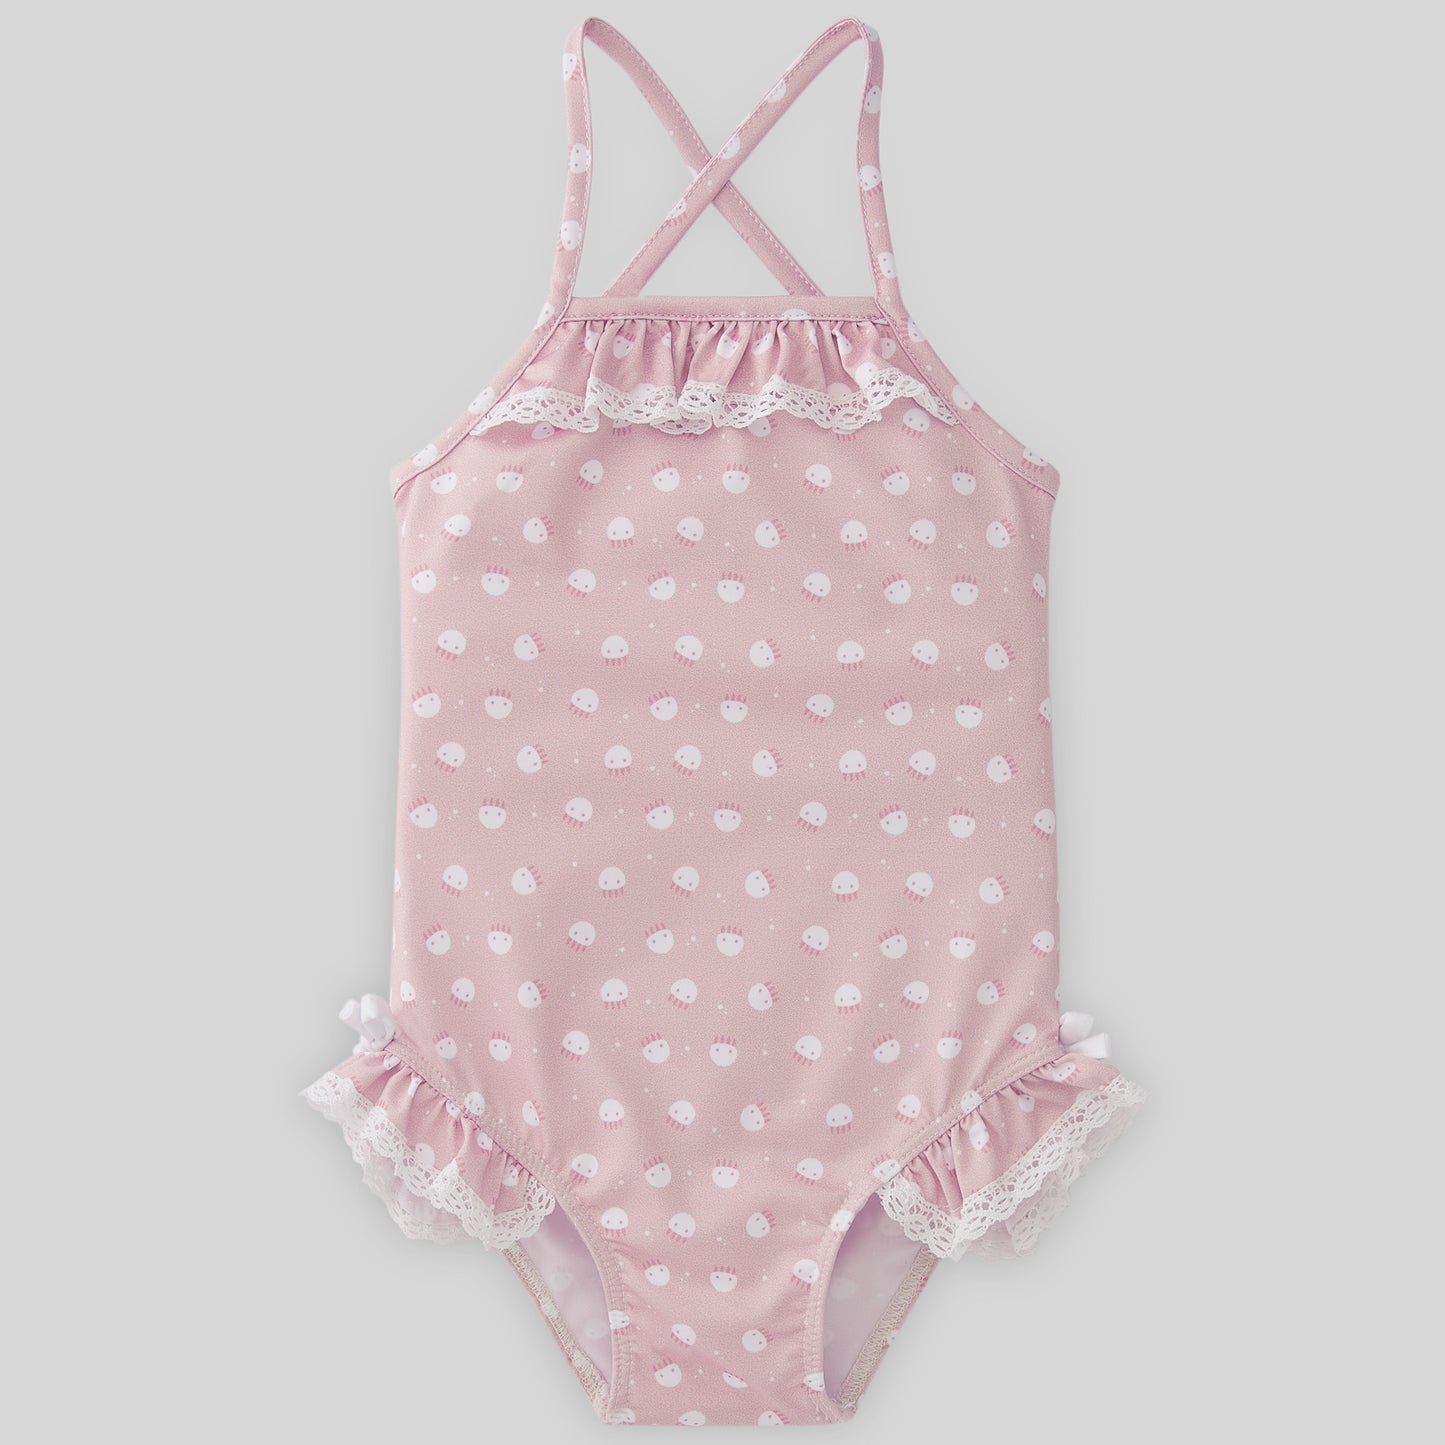 PAZ RODRIGUEZ Pink-white jellyfish patterned one-piece swimsuit